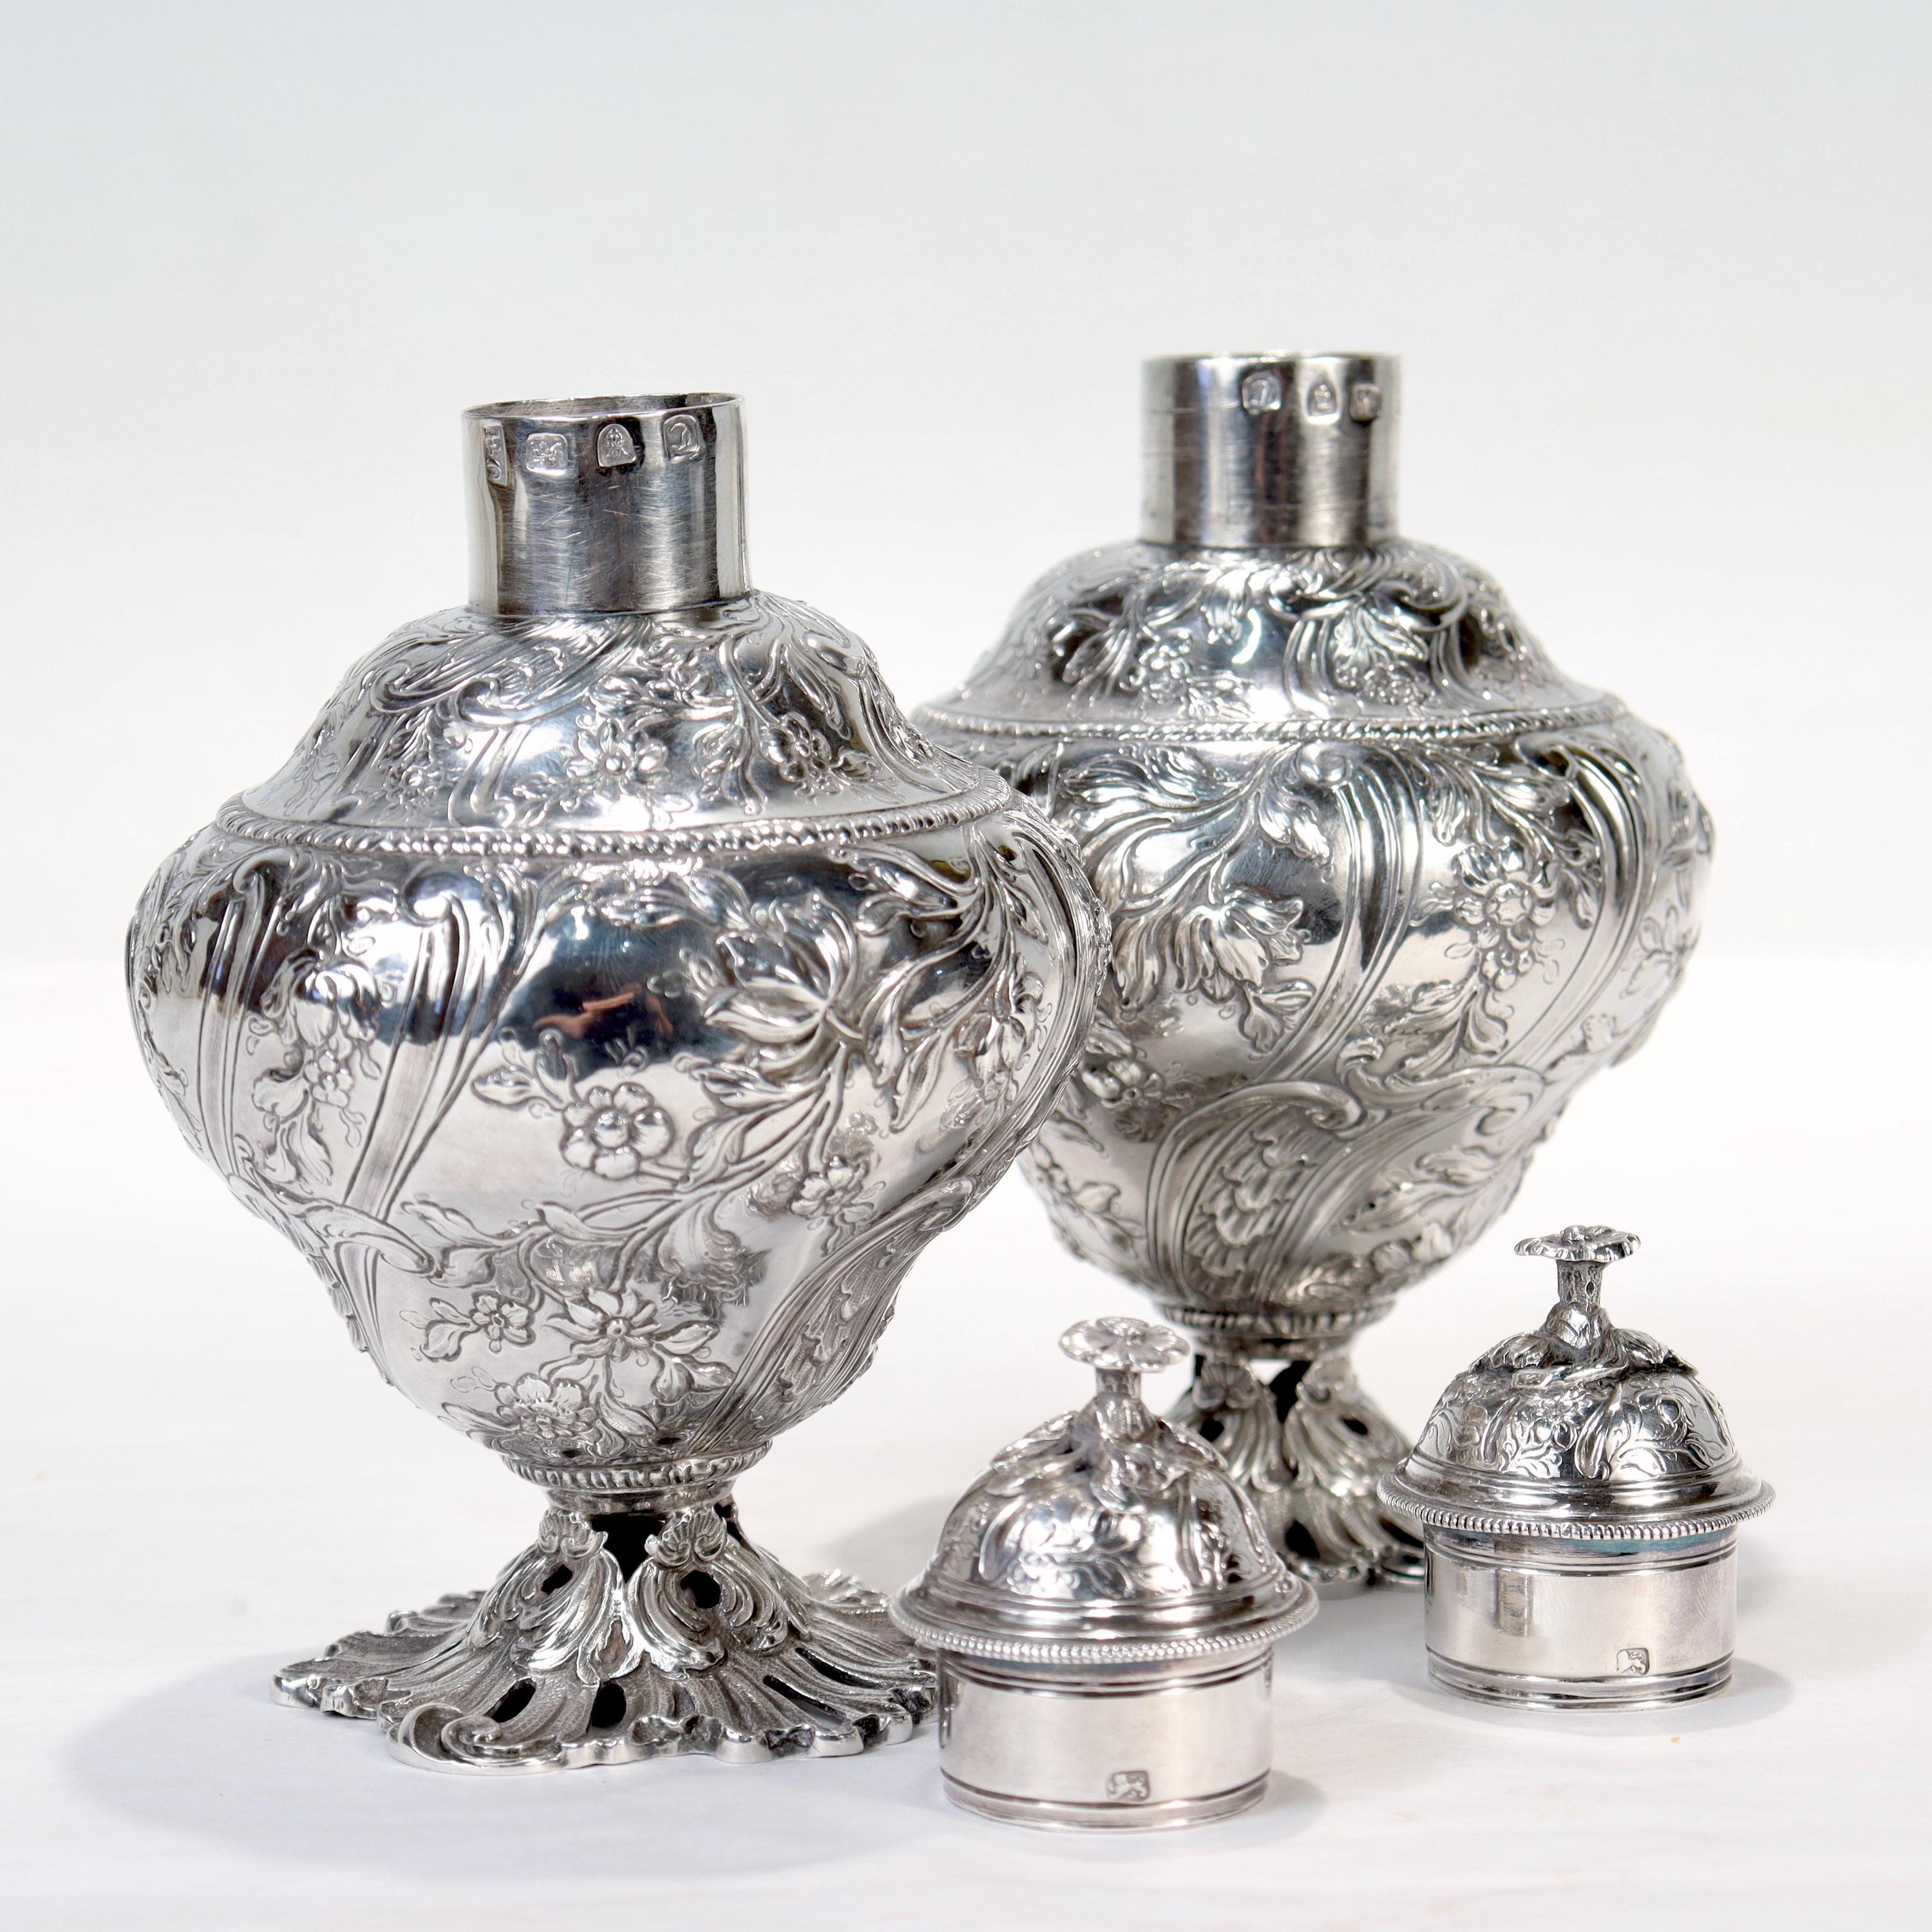 Pair of Antique Georgian English Sterling Silver Tea Caddies by Francis Crump For Sale 9